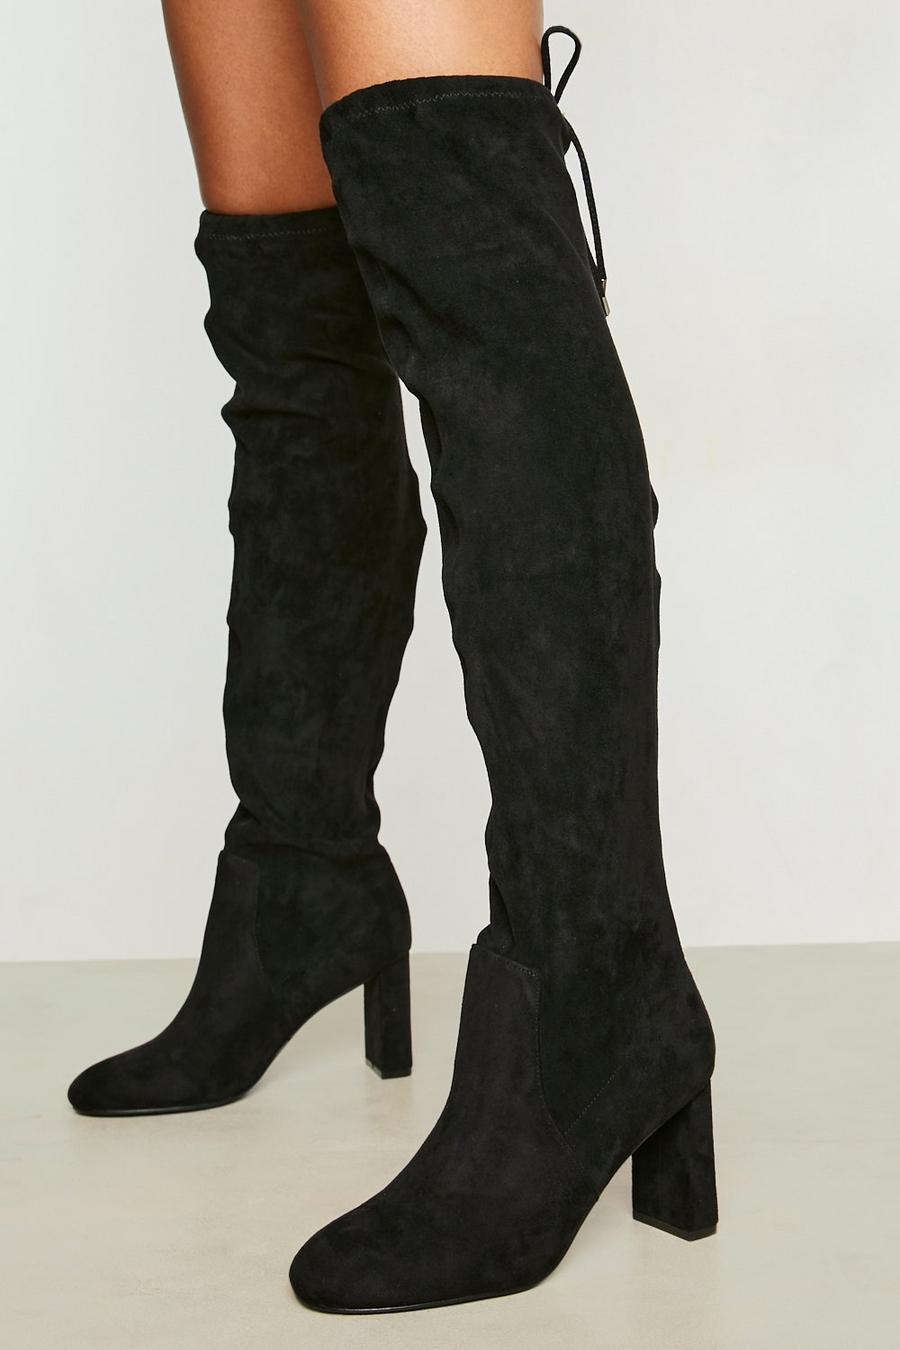 Black noir Flat Heel Round Over The Knee Stretch Boots